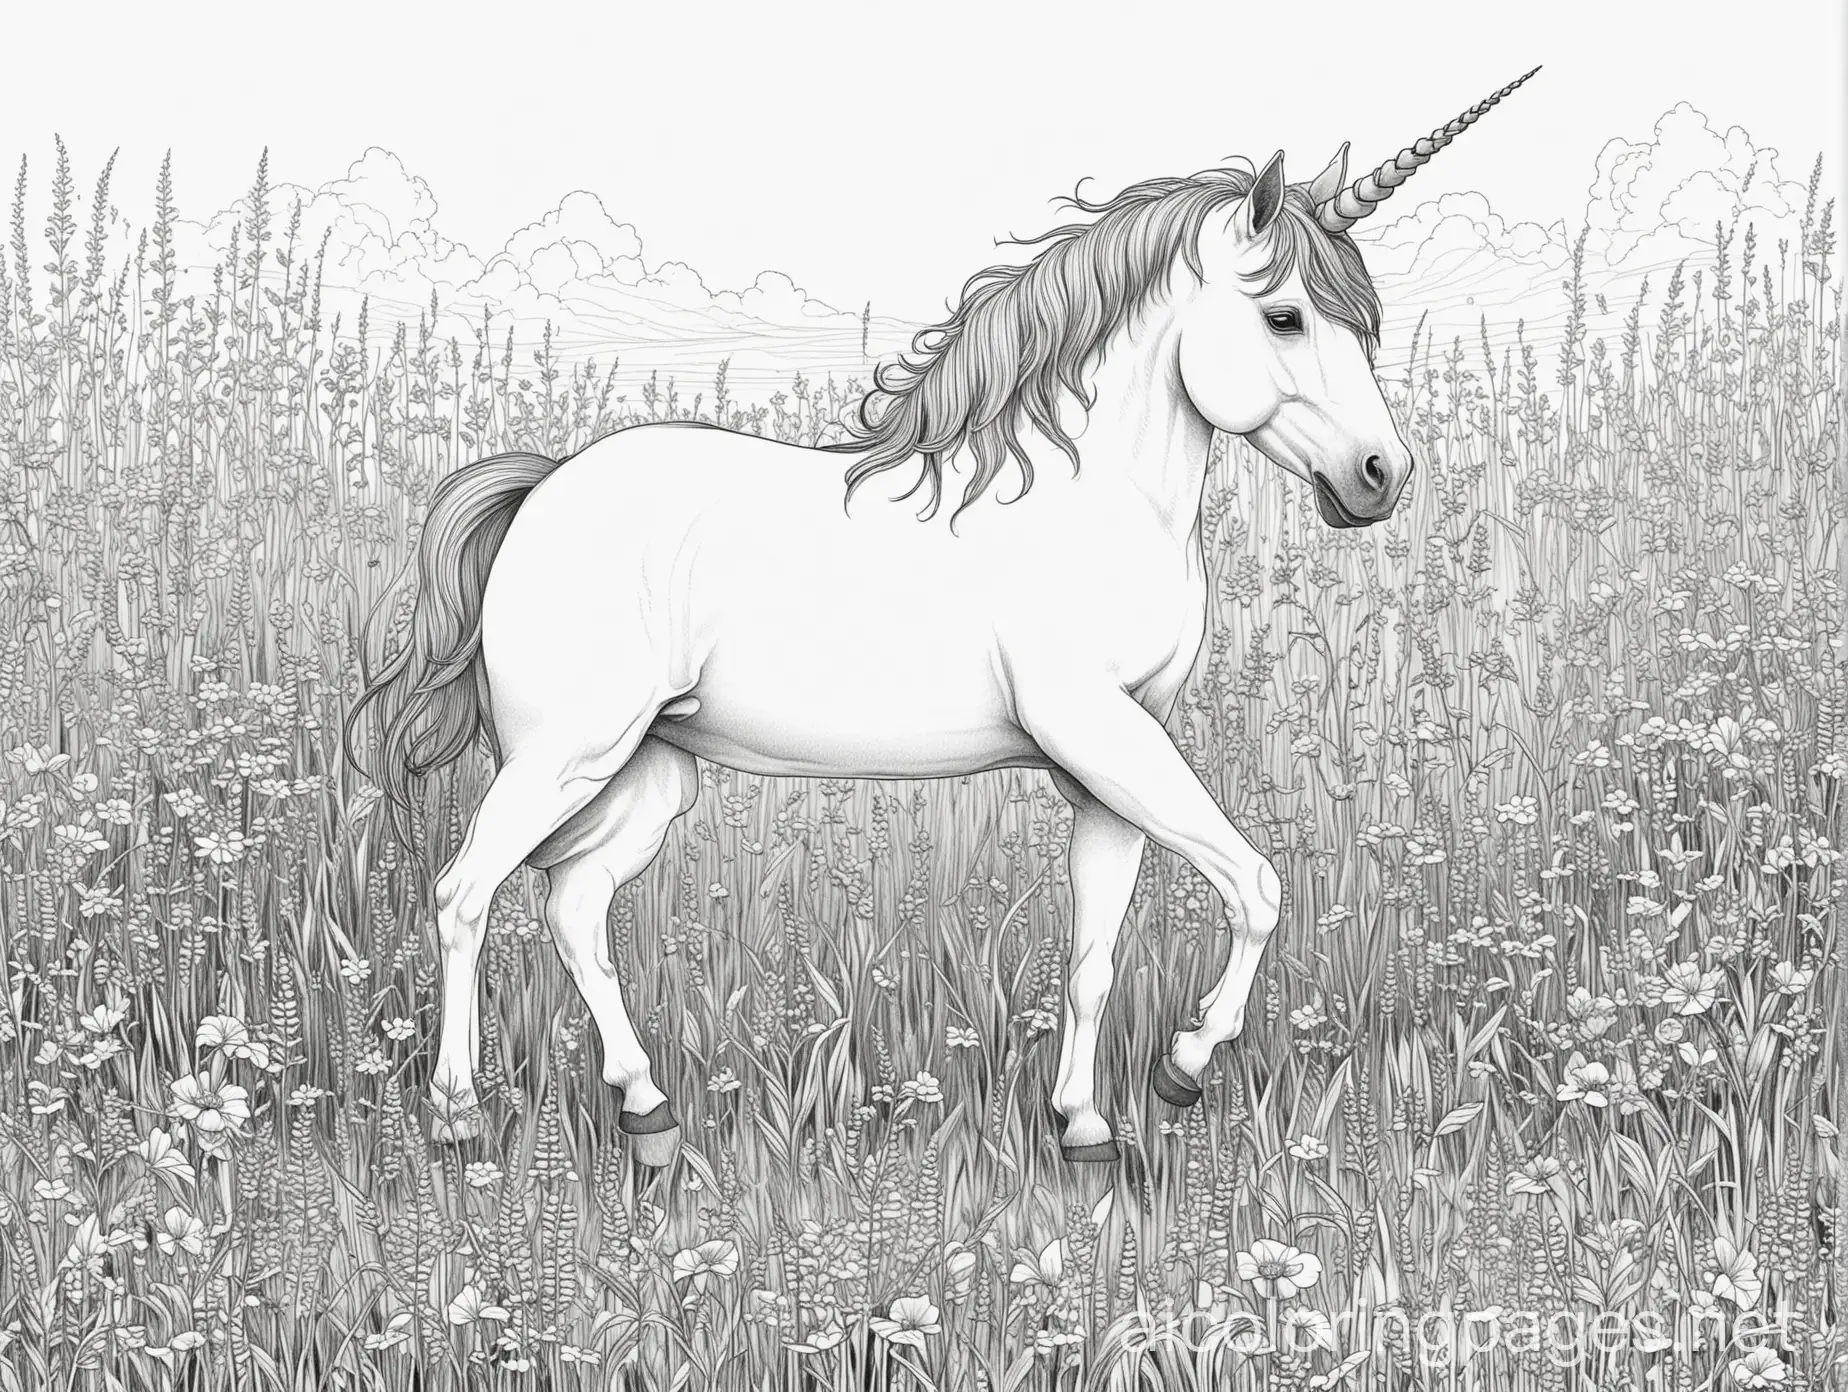 unicorn in grass field, Coloring Page, black and white, line art, white background, Simplicity, Ample White Space. The background of the coloring page is plain white to make it easy for young children to color within the lines. The outlines of all the subjects are easy to distinguish, making it simple for kids to color without too much difficulty